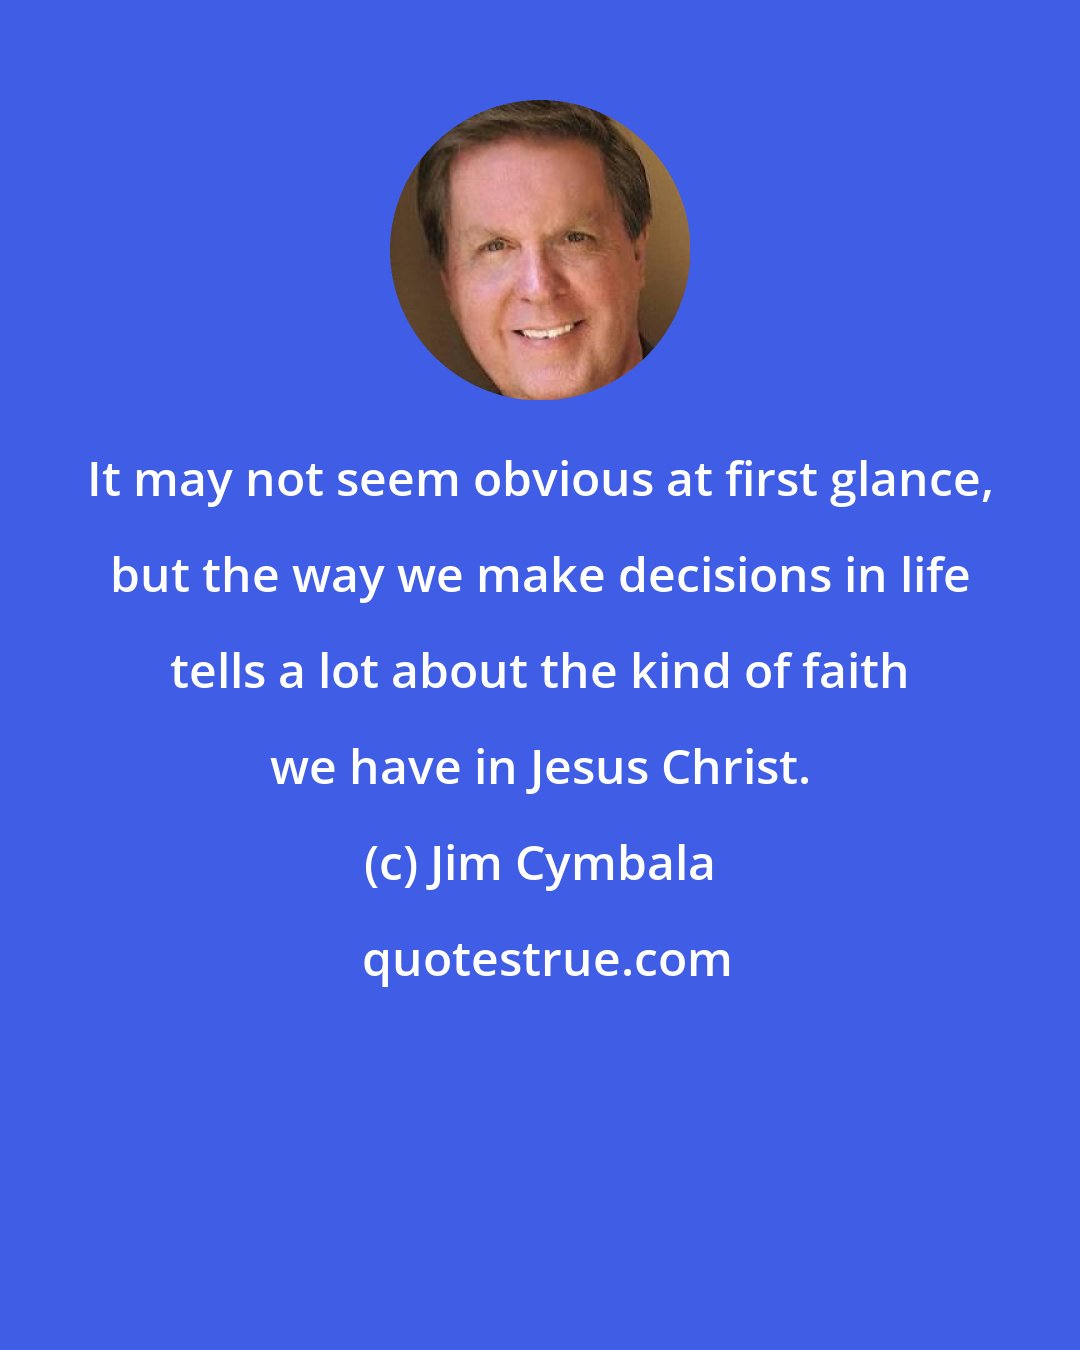 Jim Cymbala: It may not seem obvious at first glance, but the way we make decisions in life tells a lot about the kind of faith we have in Jesus Christ.